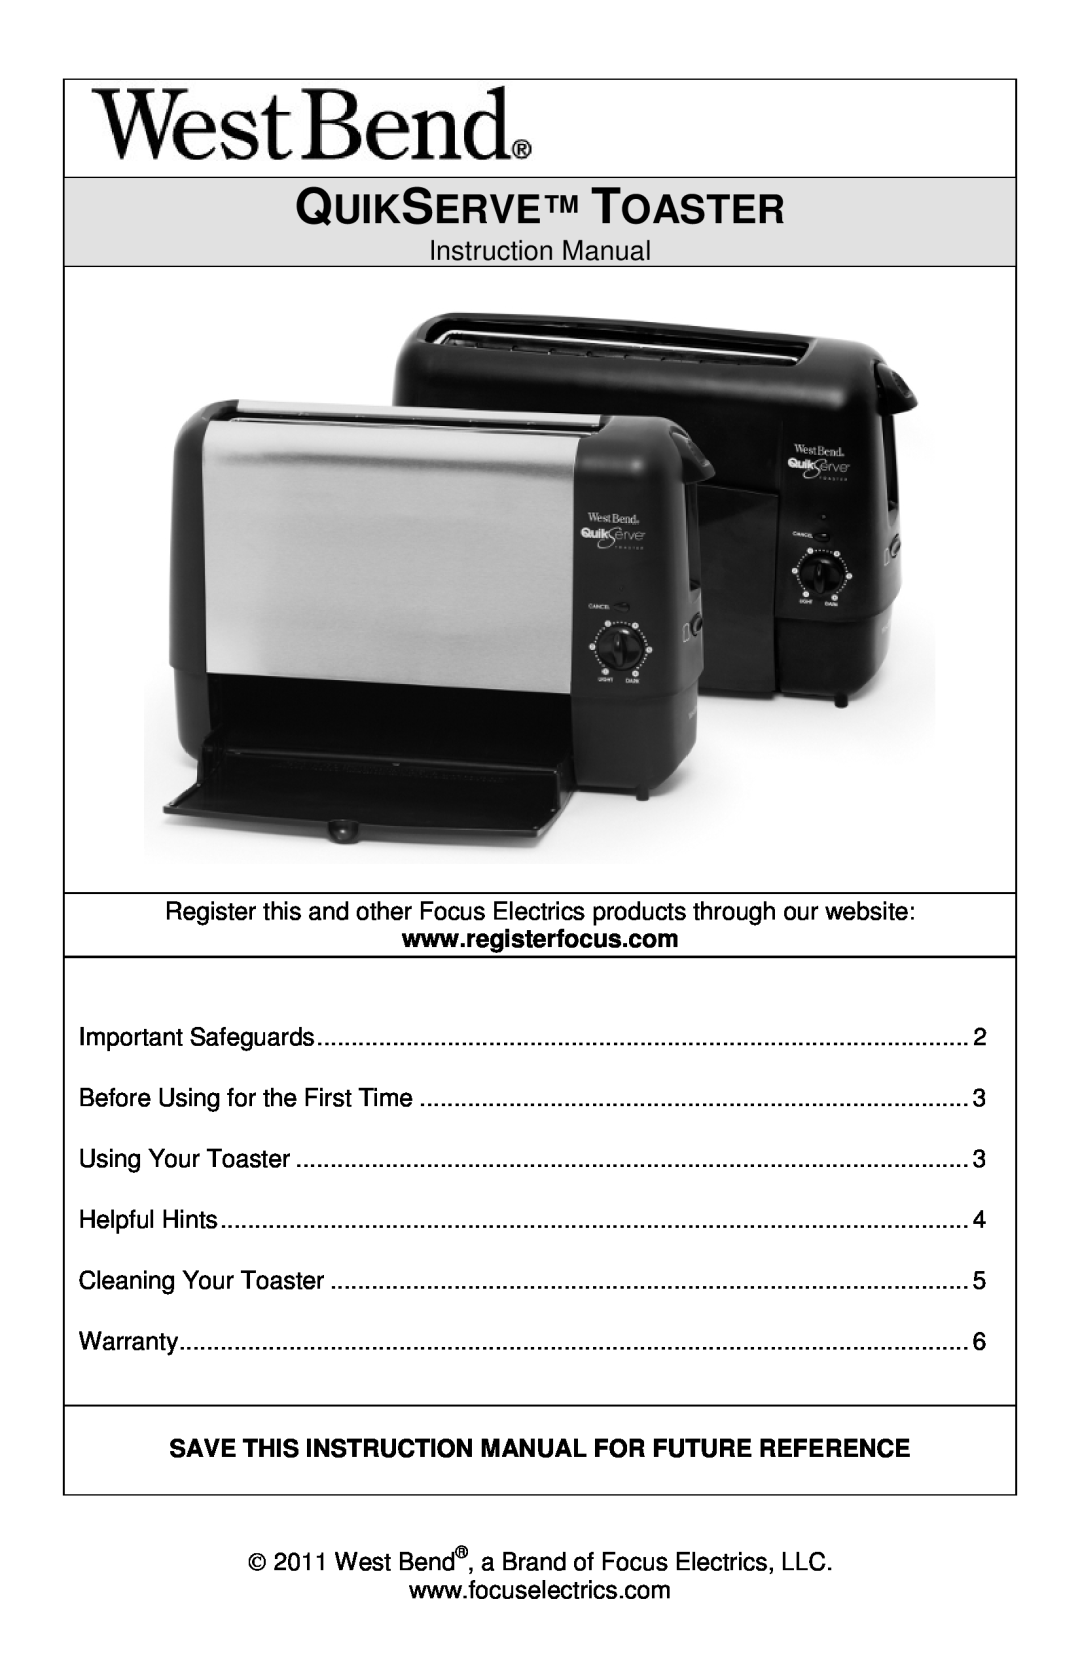 West Bend 643-050 instruction manual Quikserve Toaster 